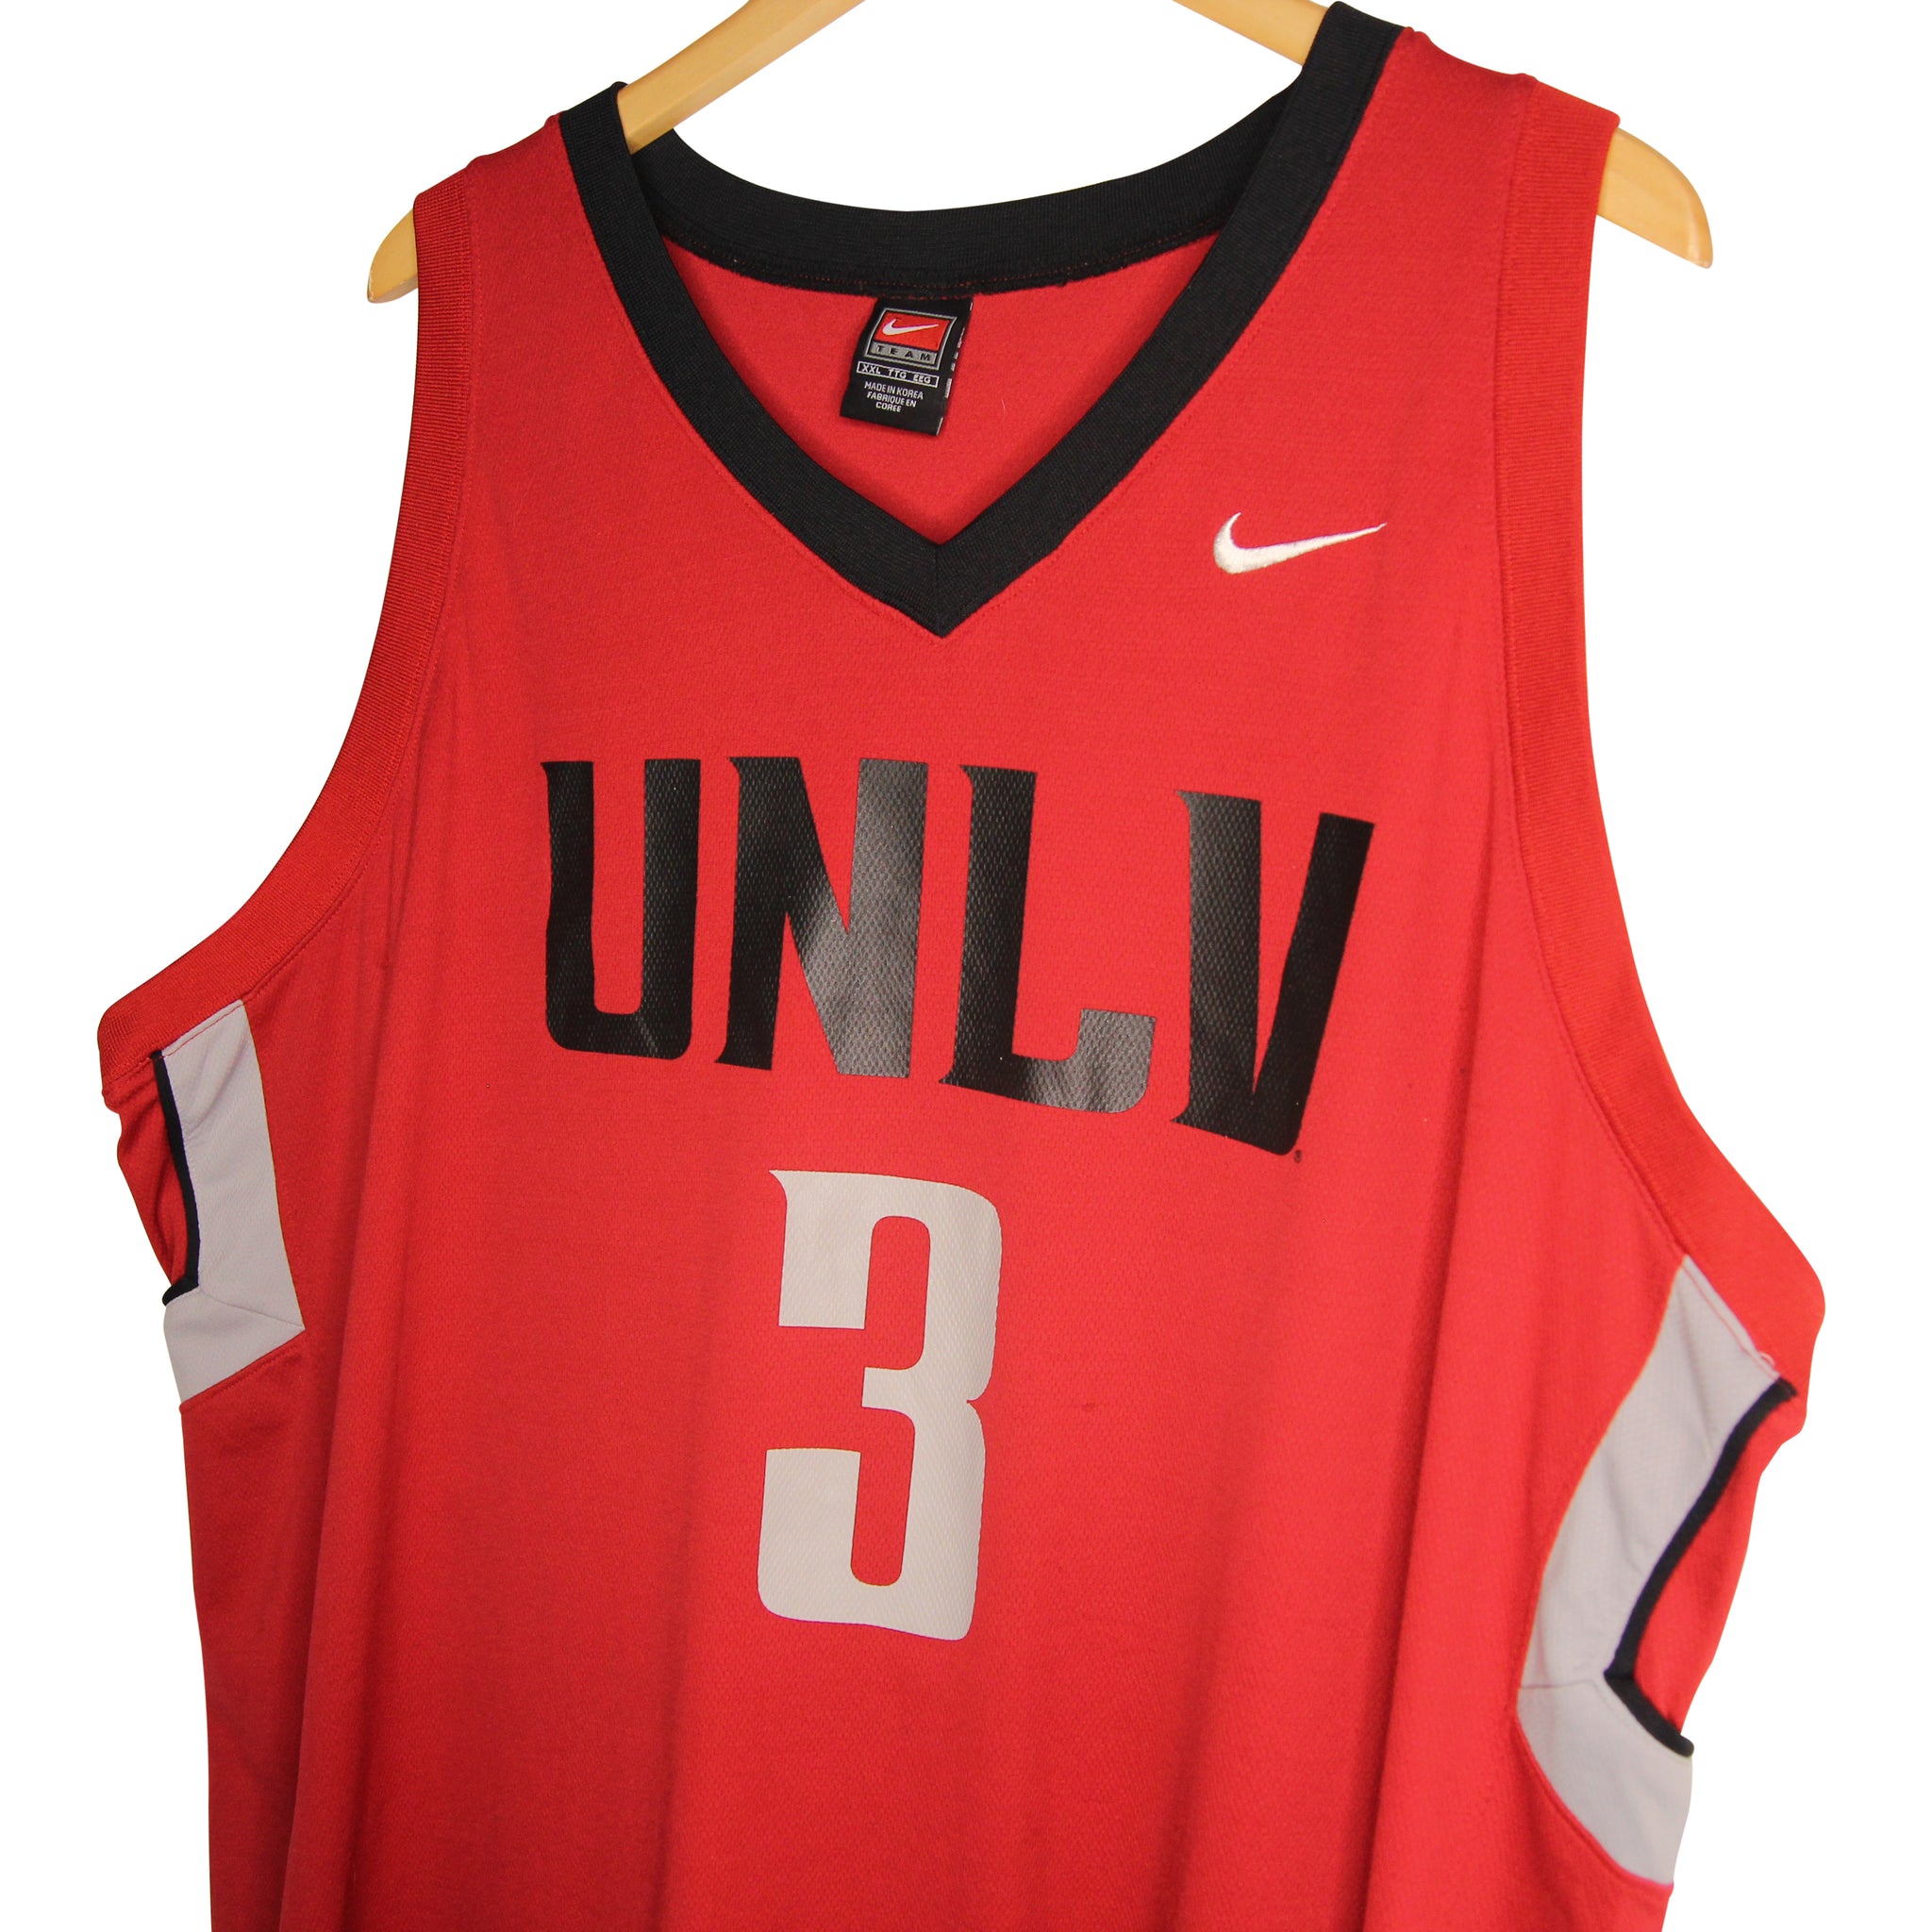 Men's UNLV Red Basketball Jersey Size L